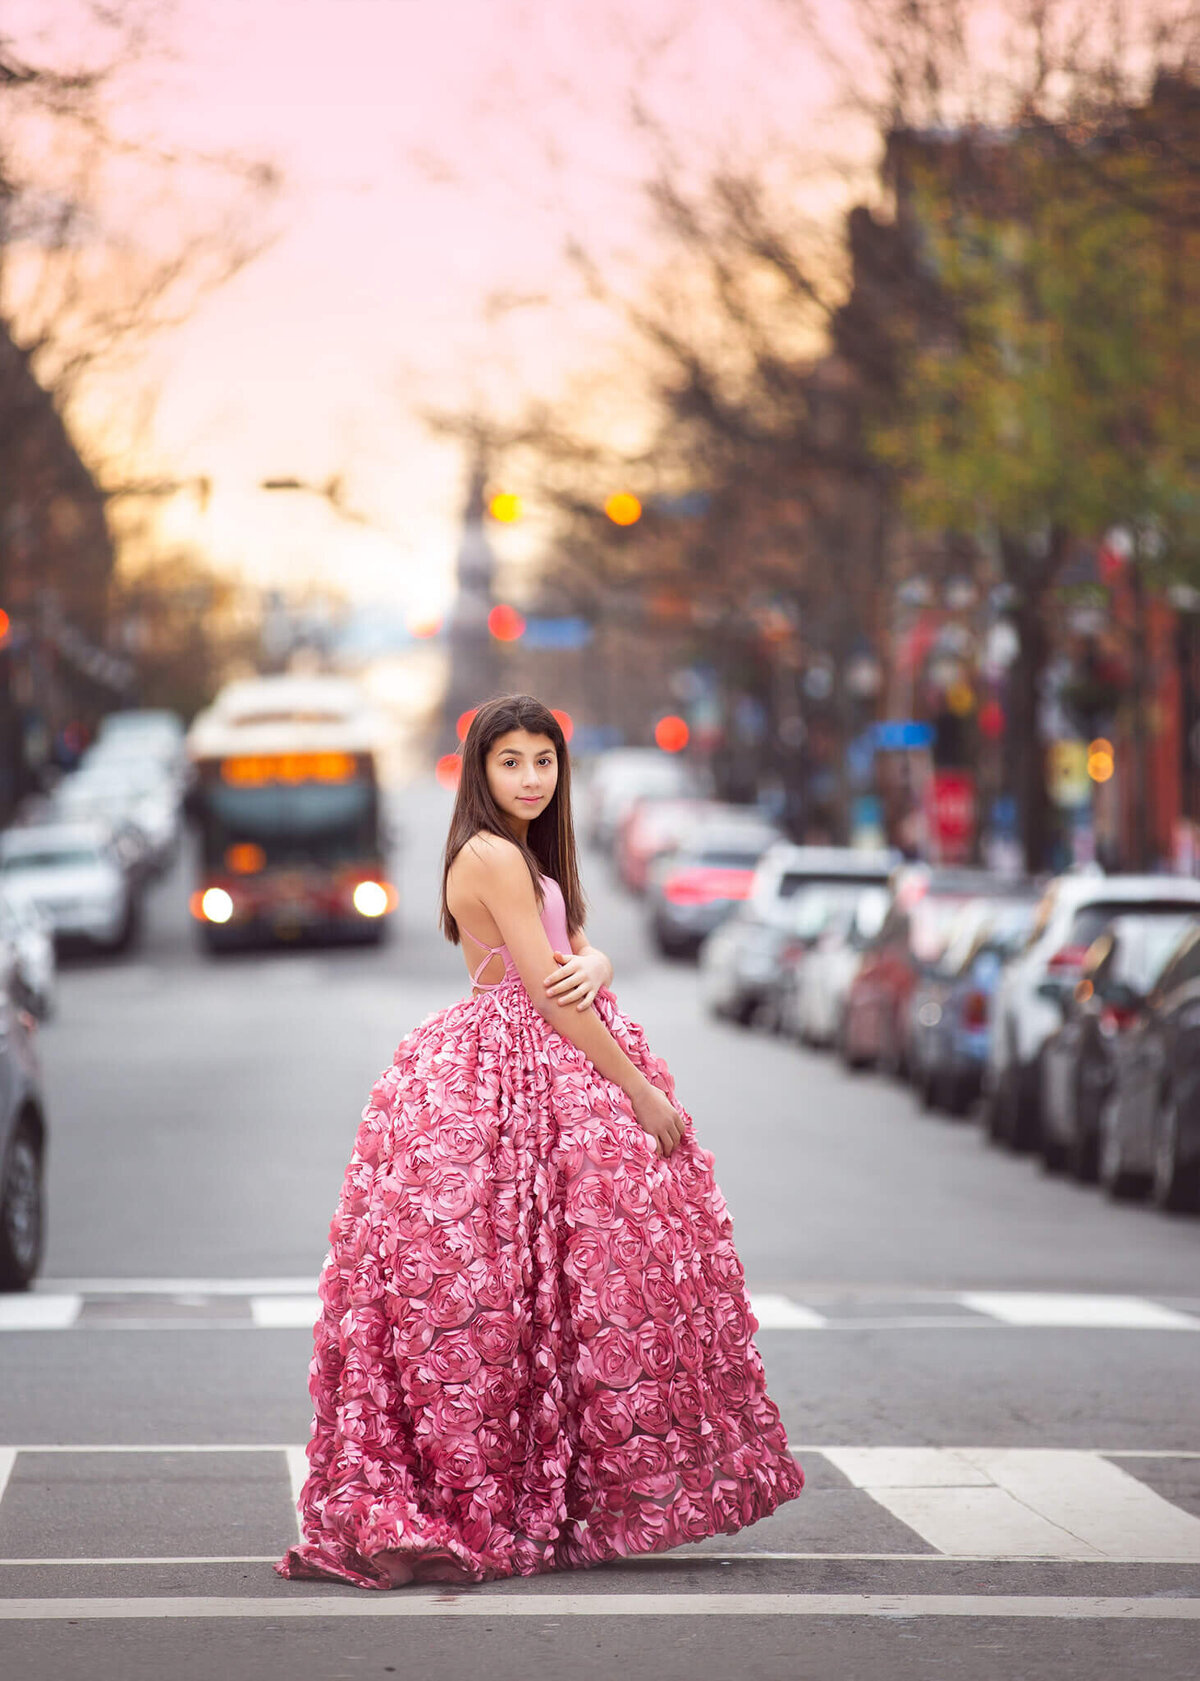 Teen wearign couture gown in urban photoshoot by LA photographer